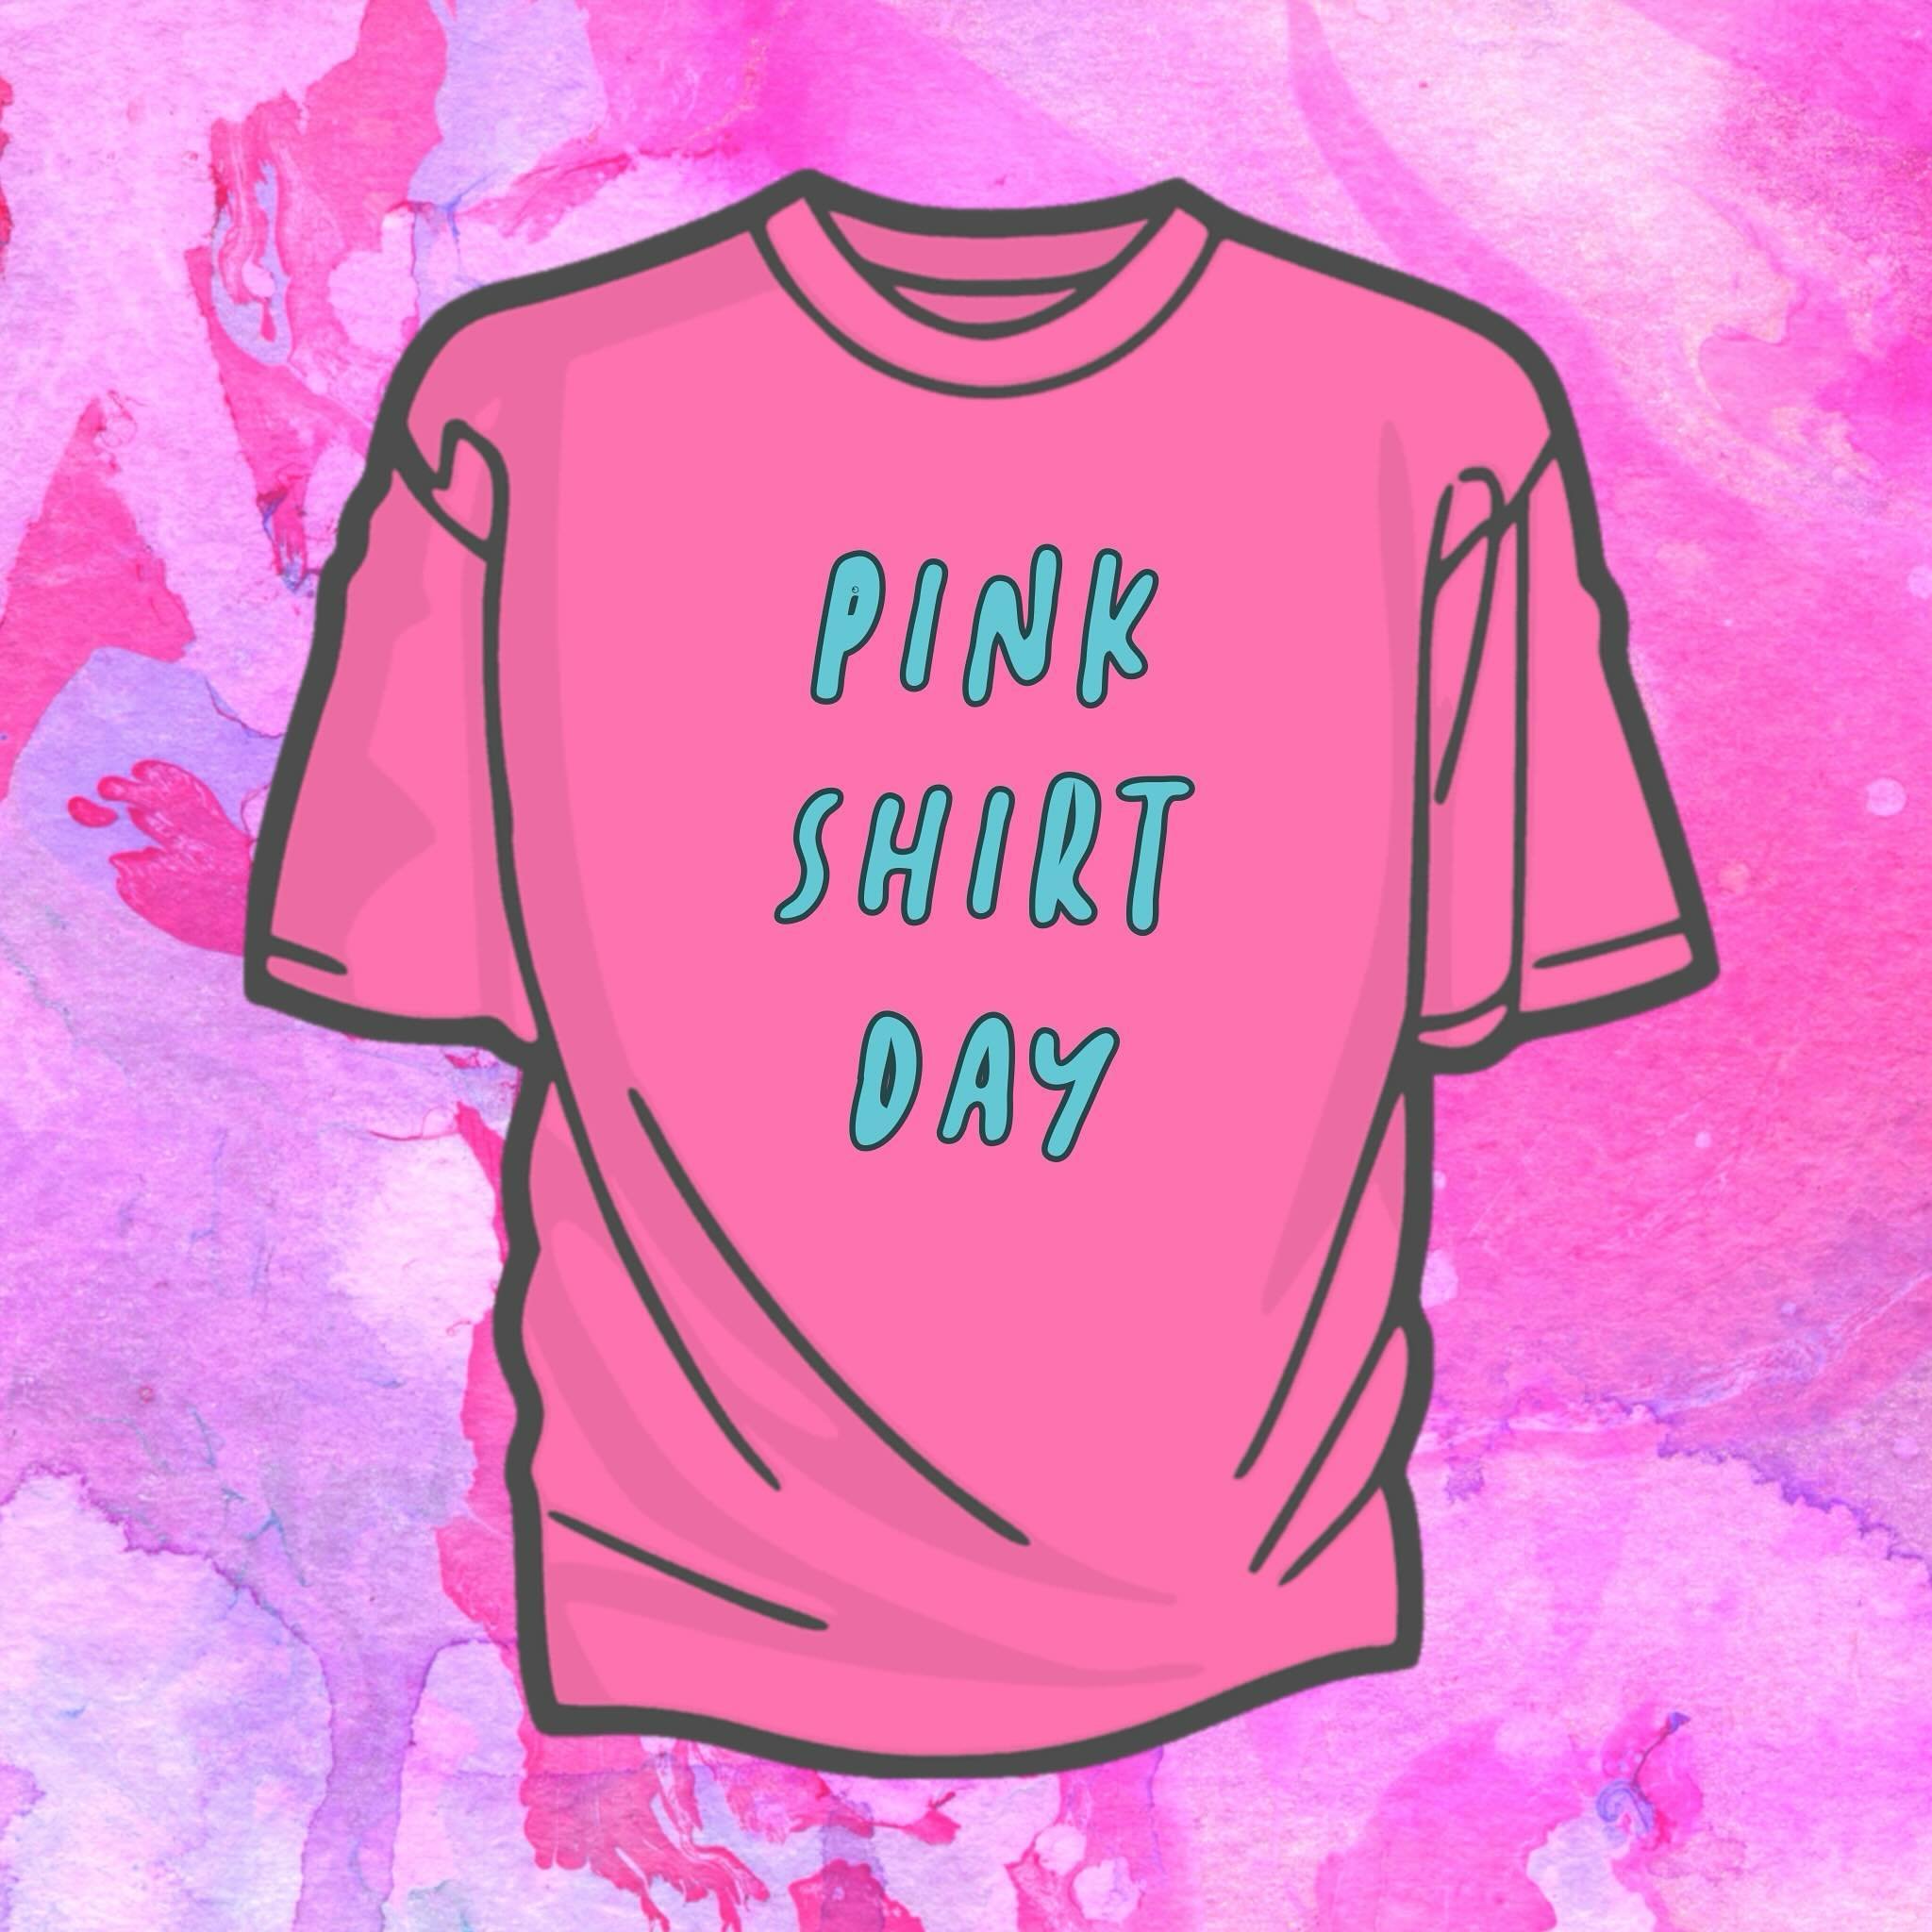 Today is @pinkshirtday 🩷👚 in 2007, a teenage boy in Nova Scotia was bullied for wearing a pink shirt. Two teenagers took a stand and bought 50 pink t-shirts for their classmates to wear in solidarity. The bullies were never heard from again. Today,